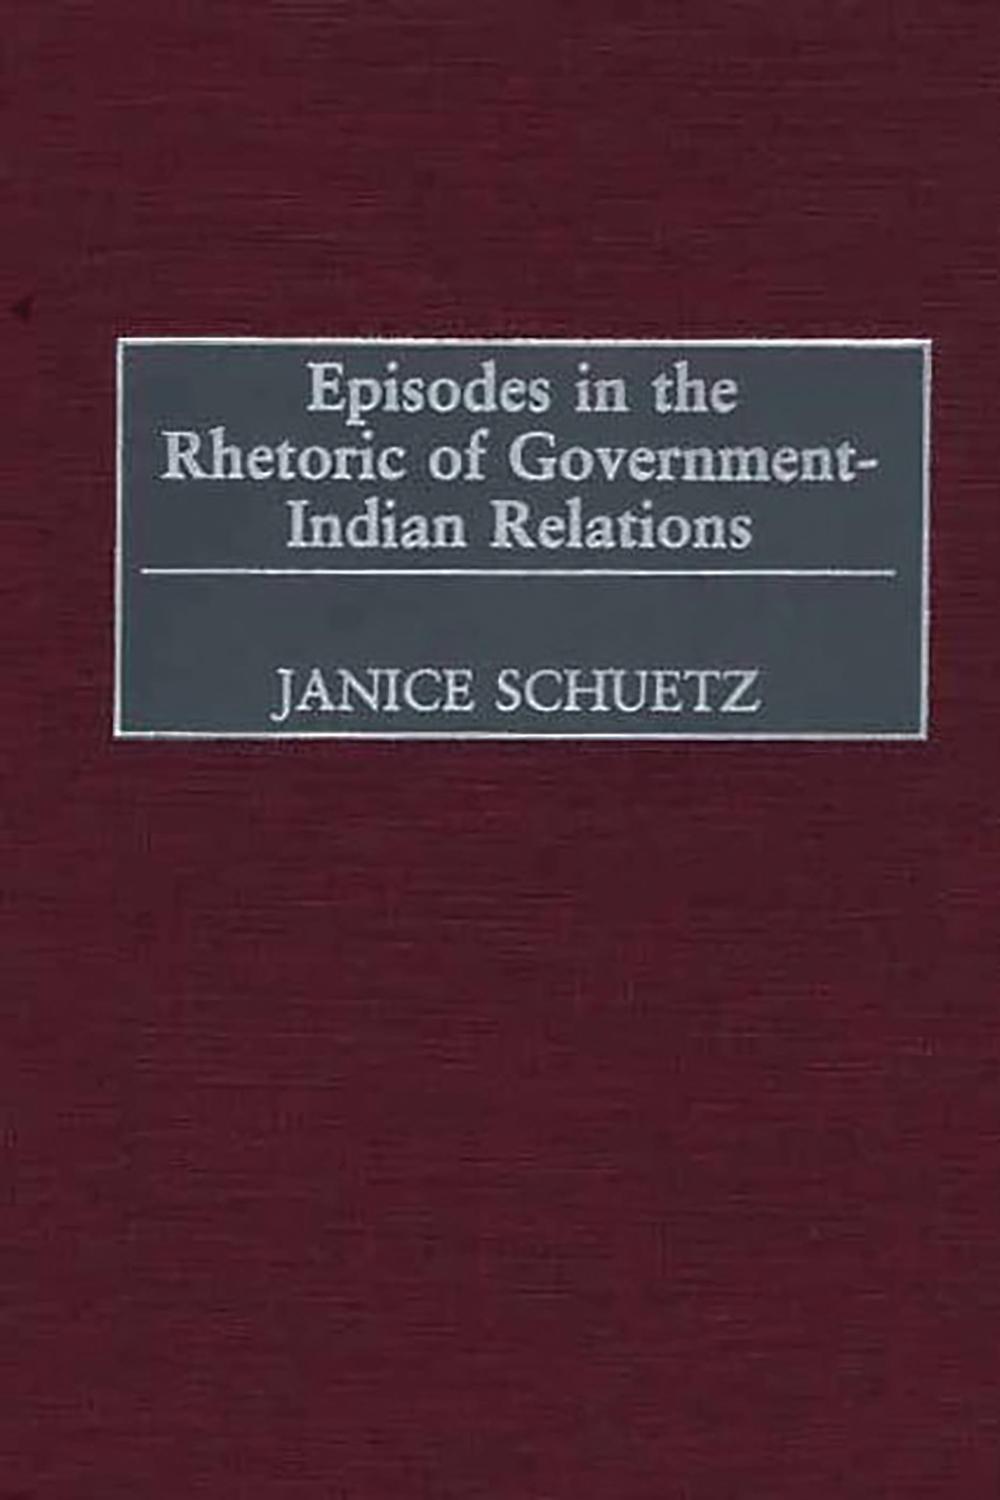 Episodes in the Rhetoric of Government-Indian Relations - Janice Schuetz